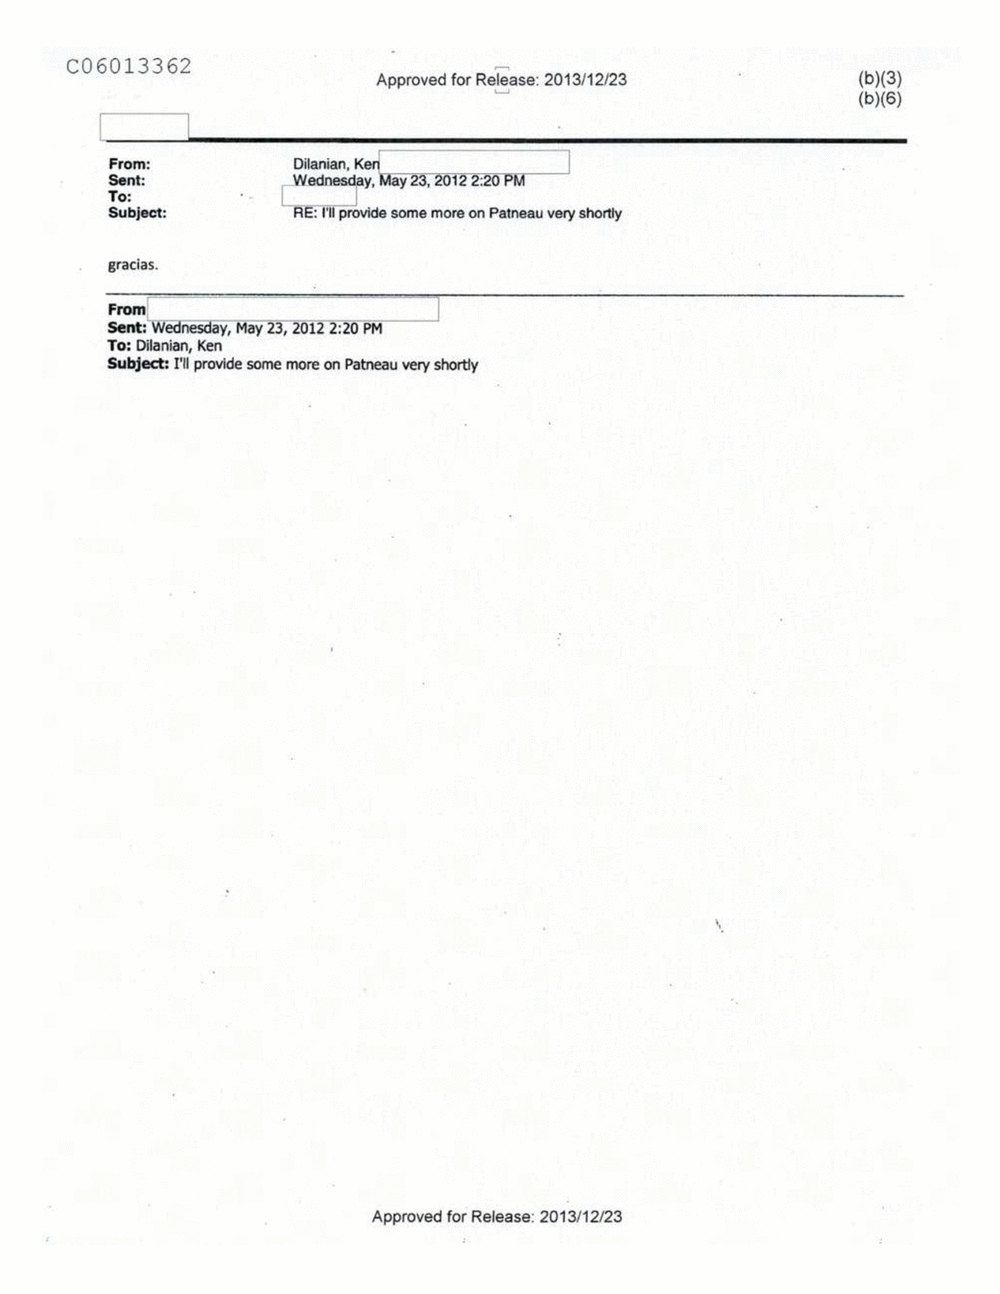 Page 286 from Email Correspondence Between Reporters and CIA Flacks